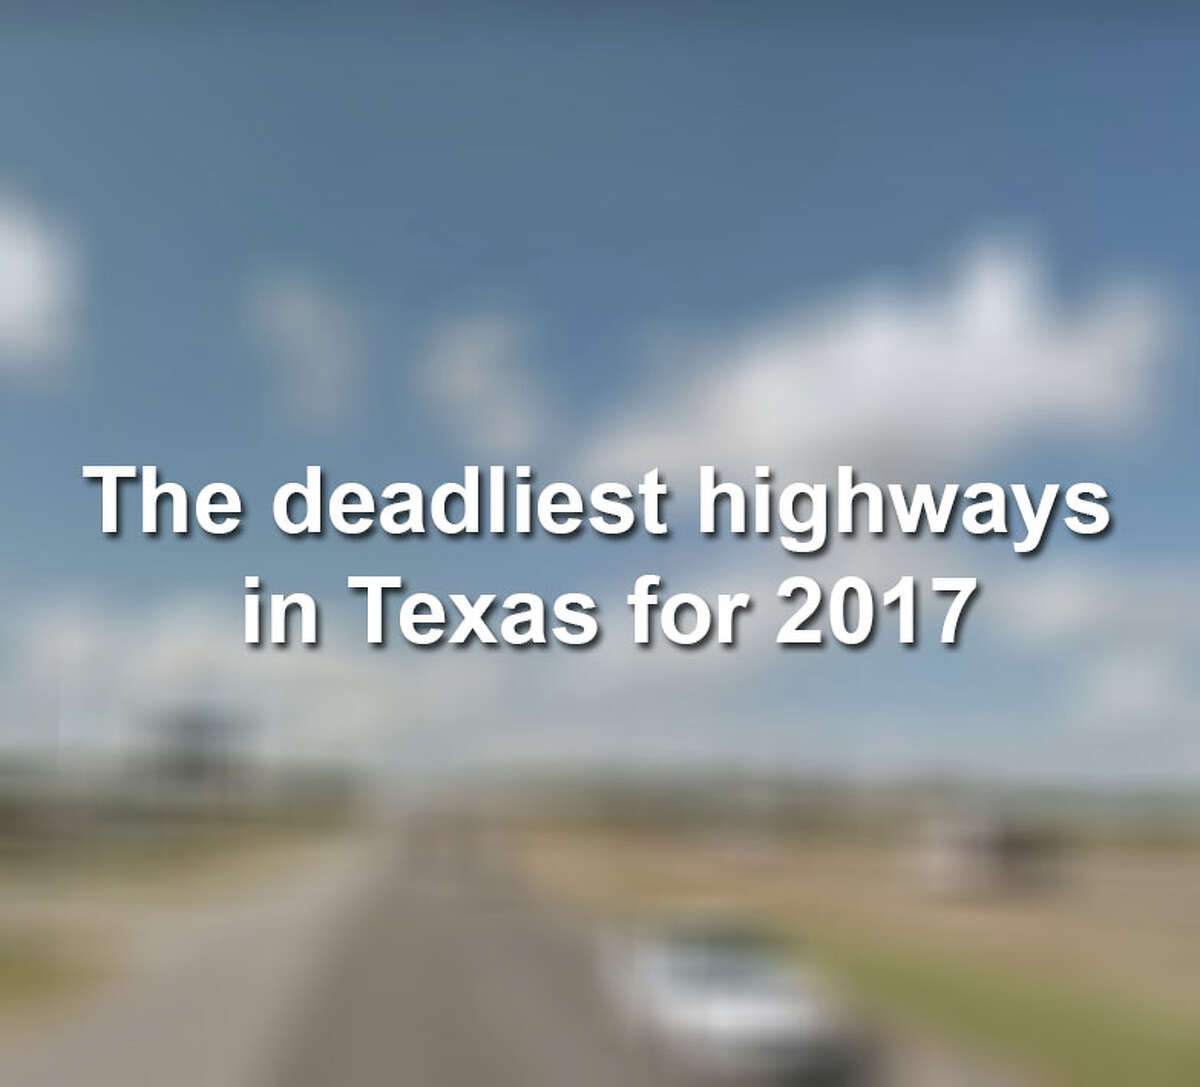 Scroll through to see the deadliest highways in the Lone Star state.